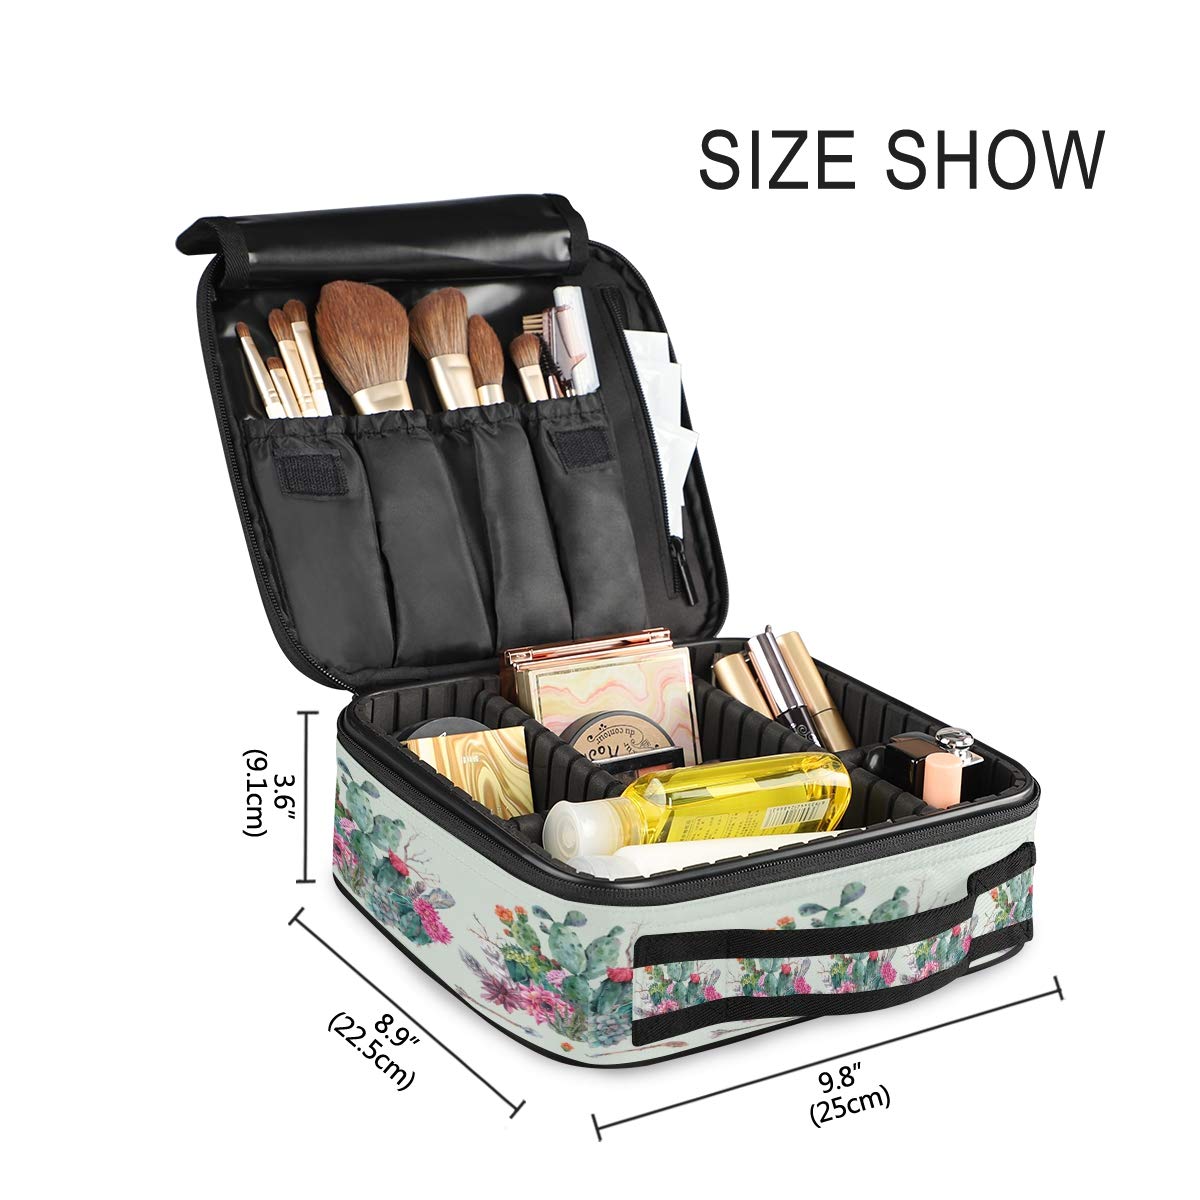 ALAZA Makeup Case Cactus Flowers Arrows Cosmetic Bag Organizer Travel Portable Storage Toiletry Bag Makeup Train Case with Adjustable Dividers for Women